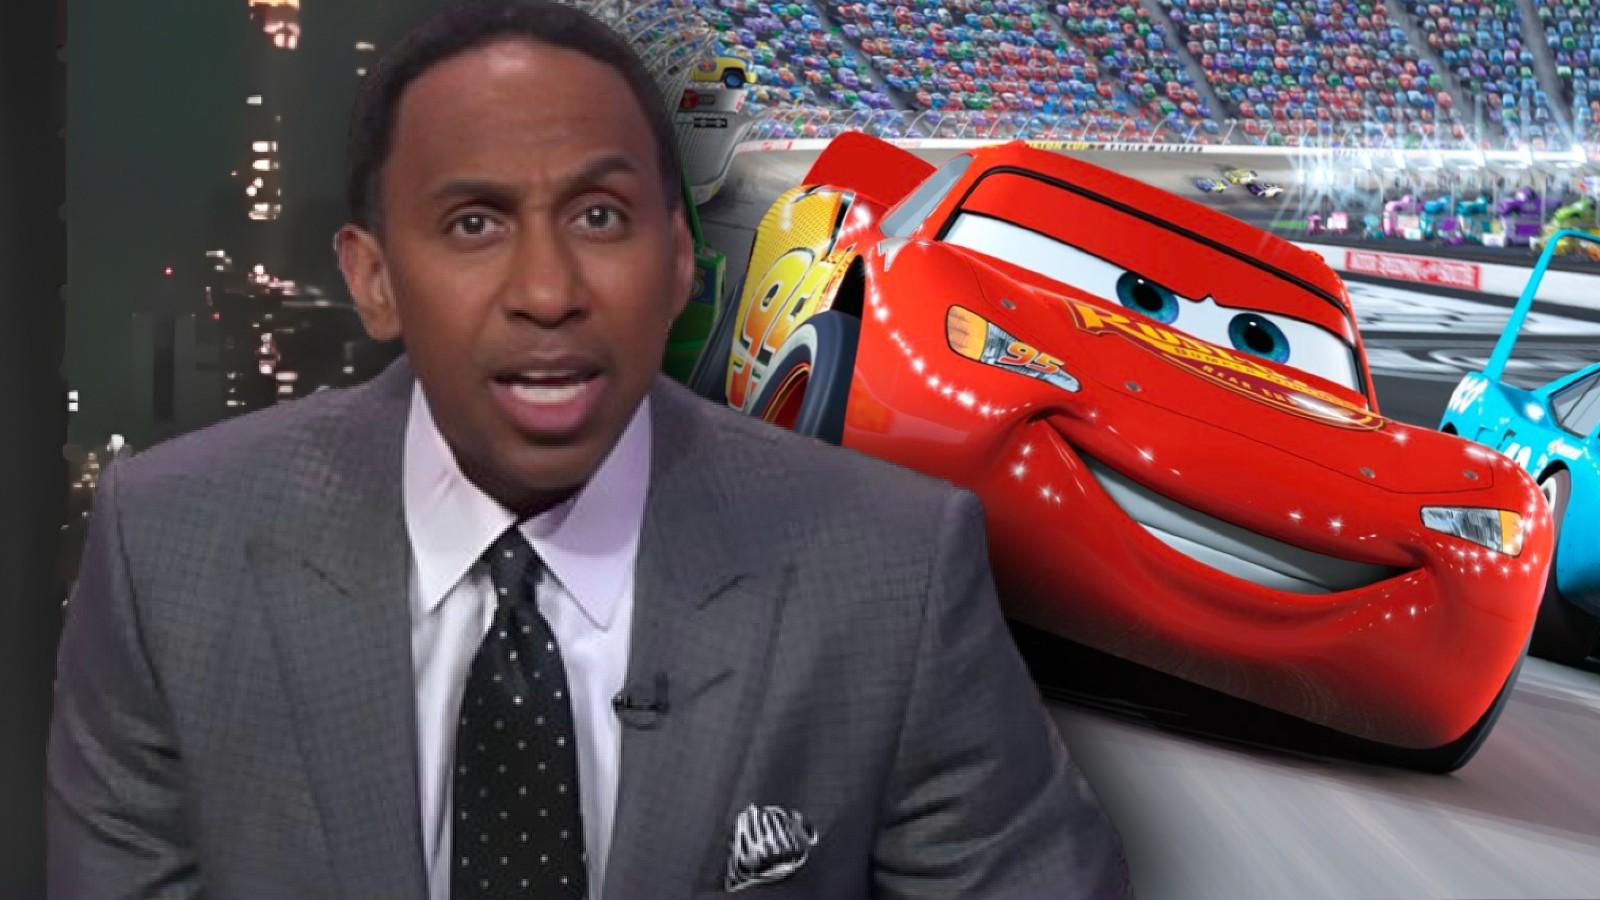 Stephen A Smith and Lightning McQueen in Cars